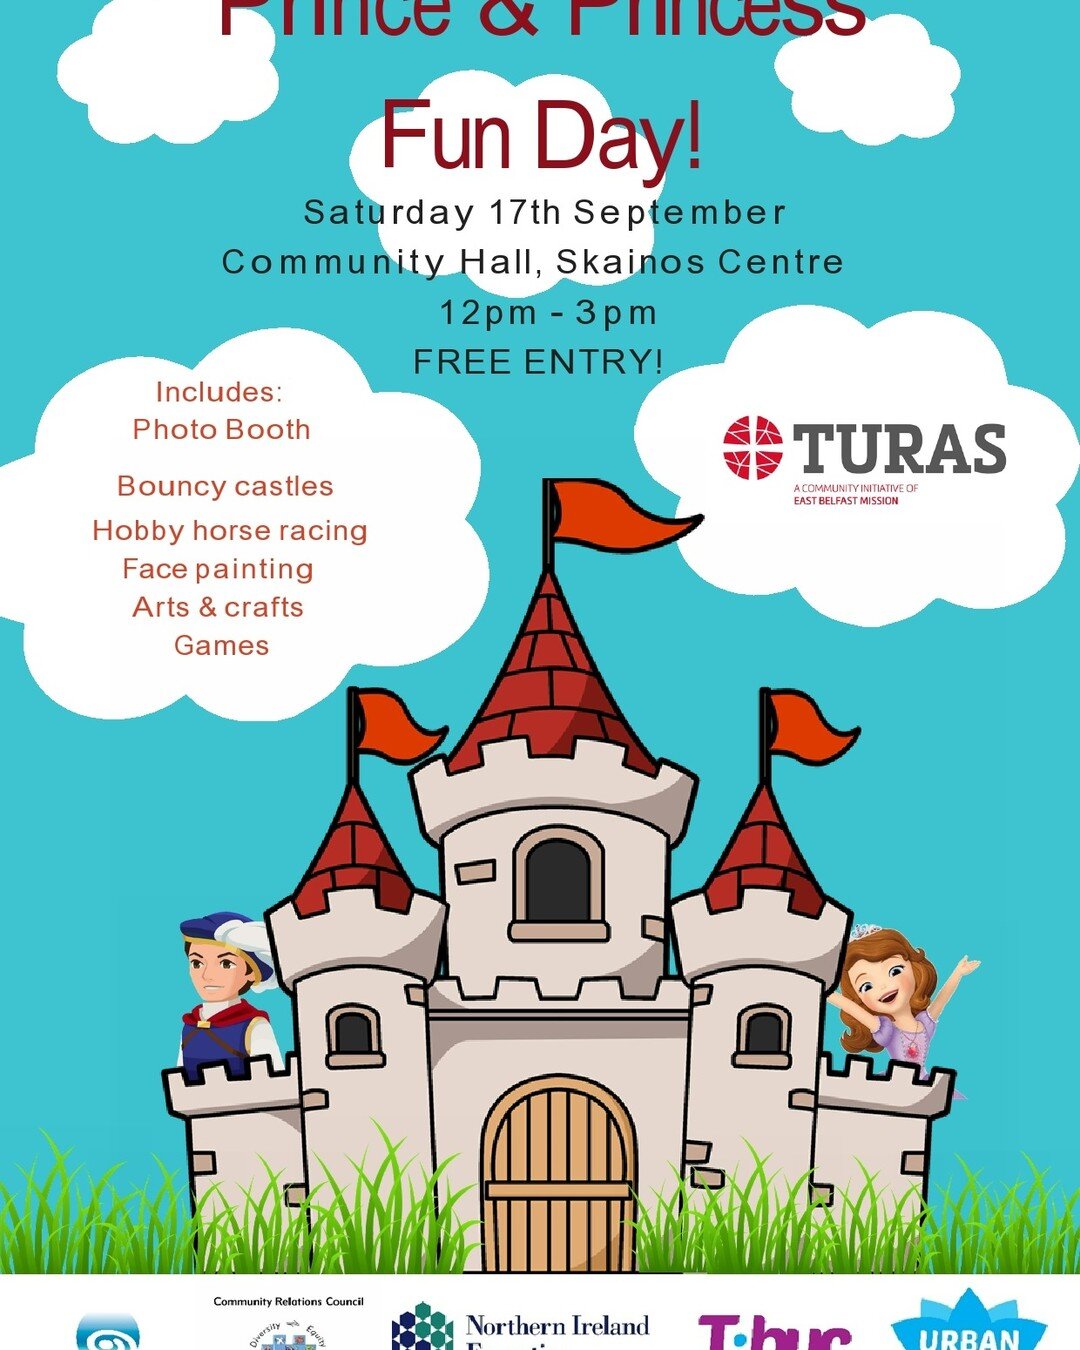 B&iacute;g&iacute; linn a chairde!

An invitation for all Princes and Princesses to attend the Turas Fun Day on September 17th September 12 - 3pm in Skainos. Come along in your favourite costume and join in the fun!